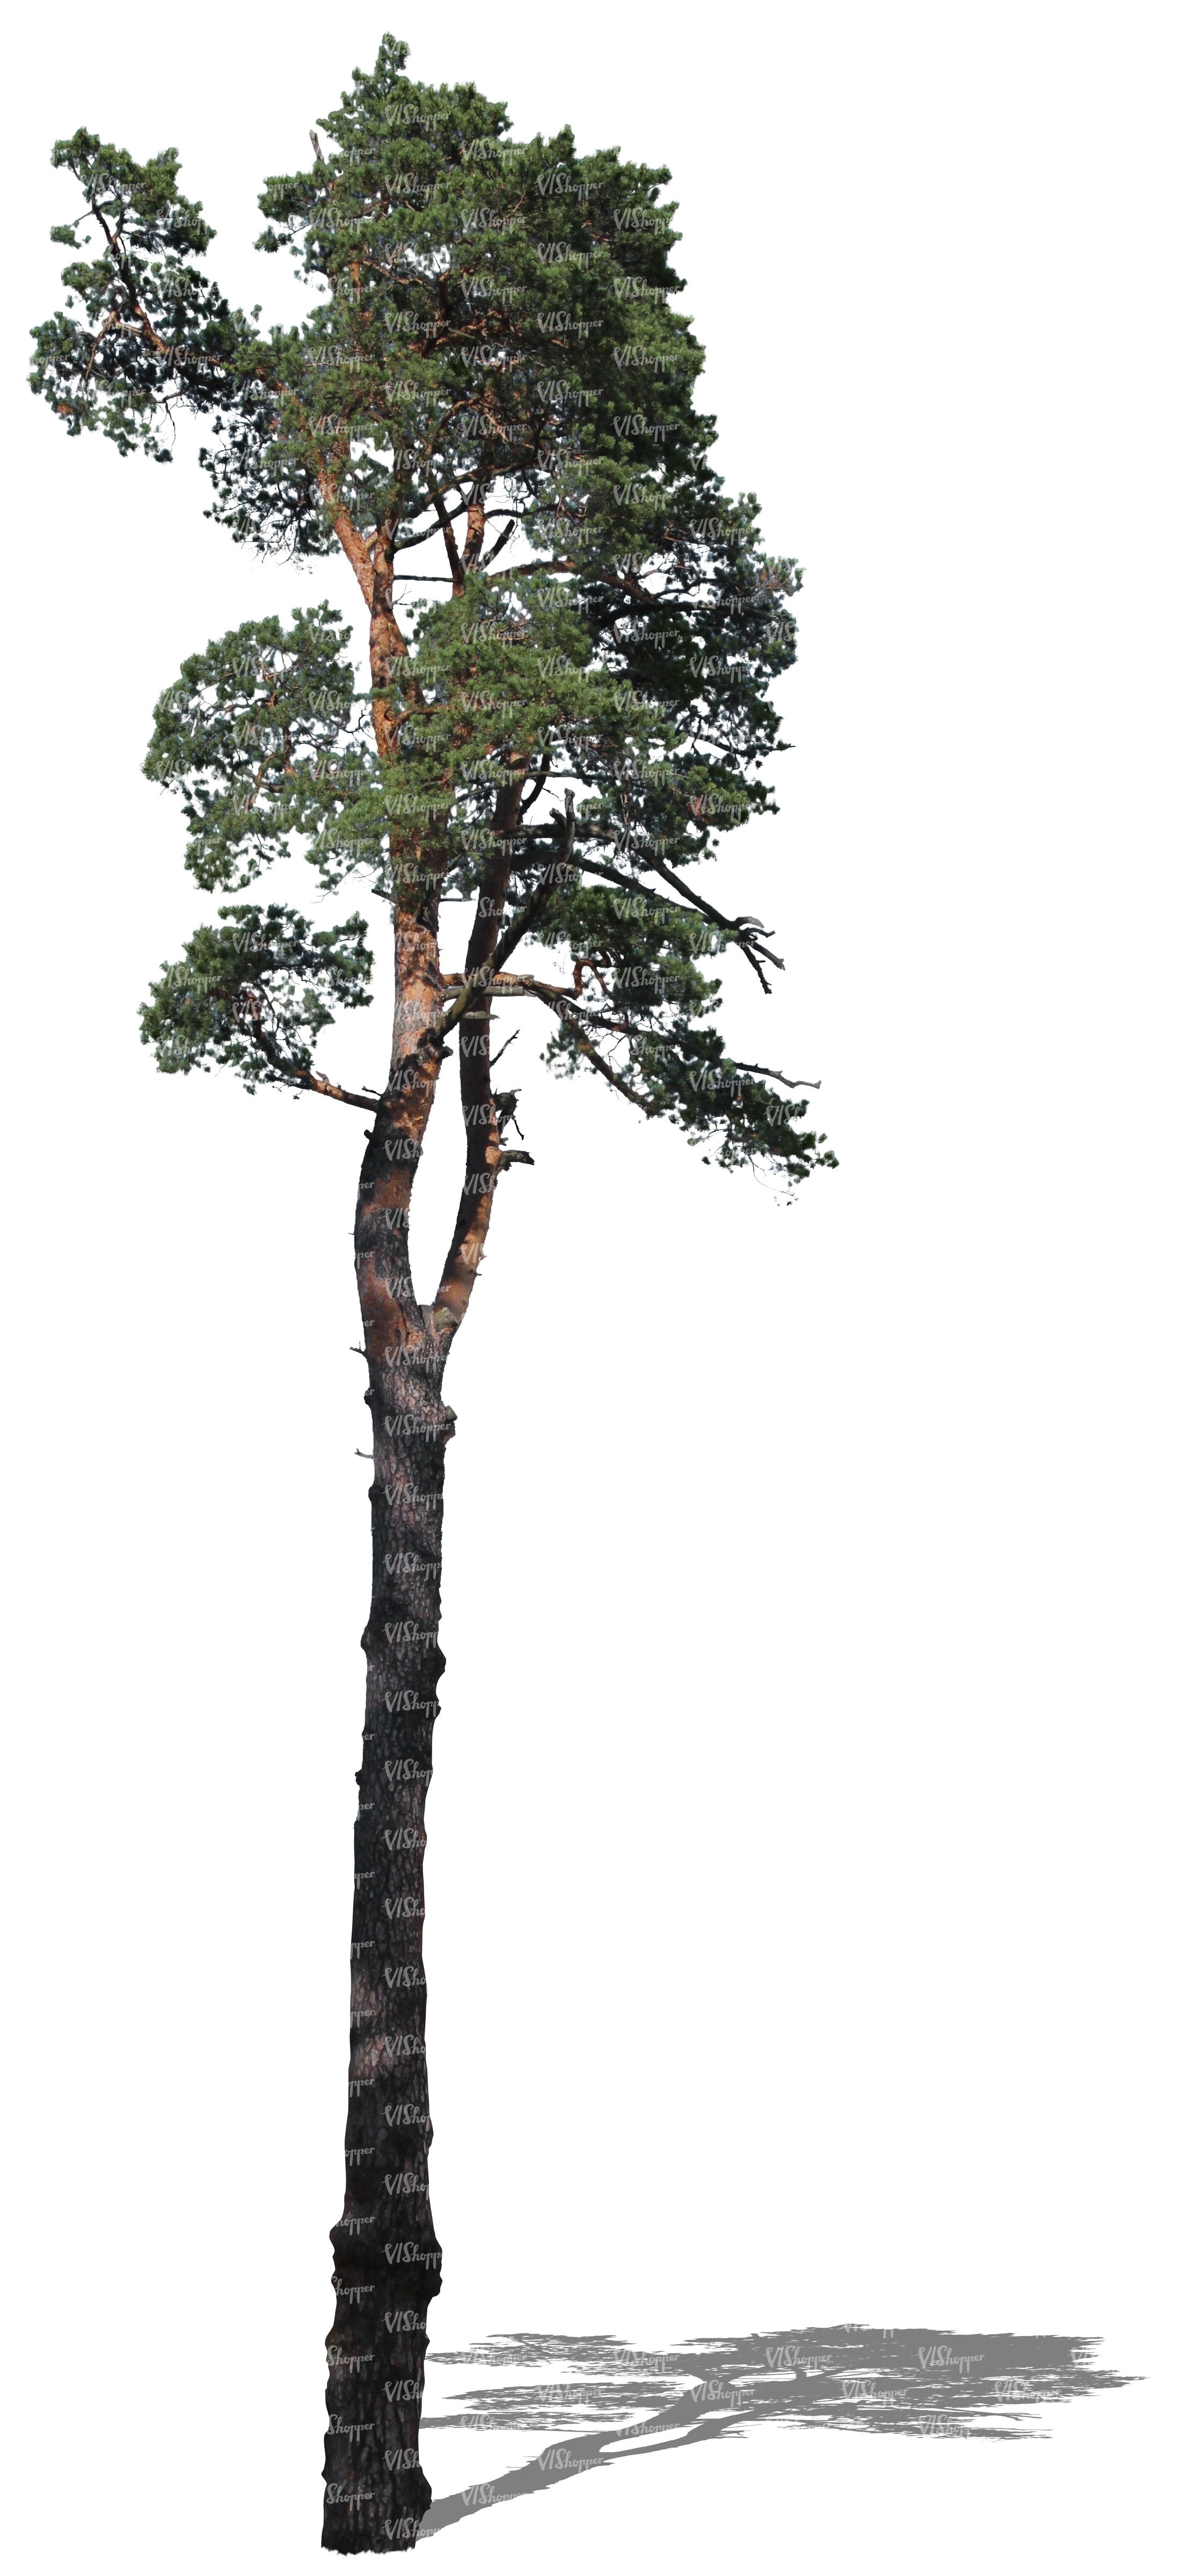 cut out tall pine tree - cut out trees and plants - VIShopper